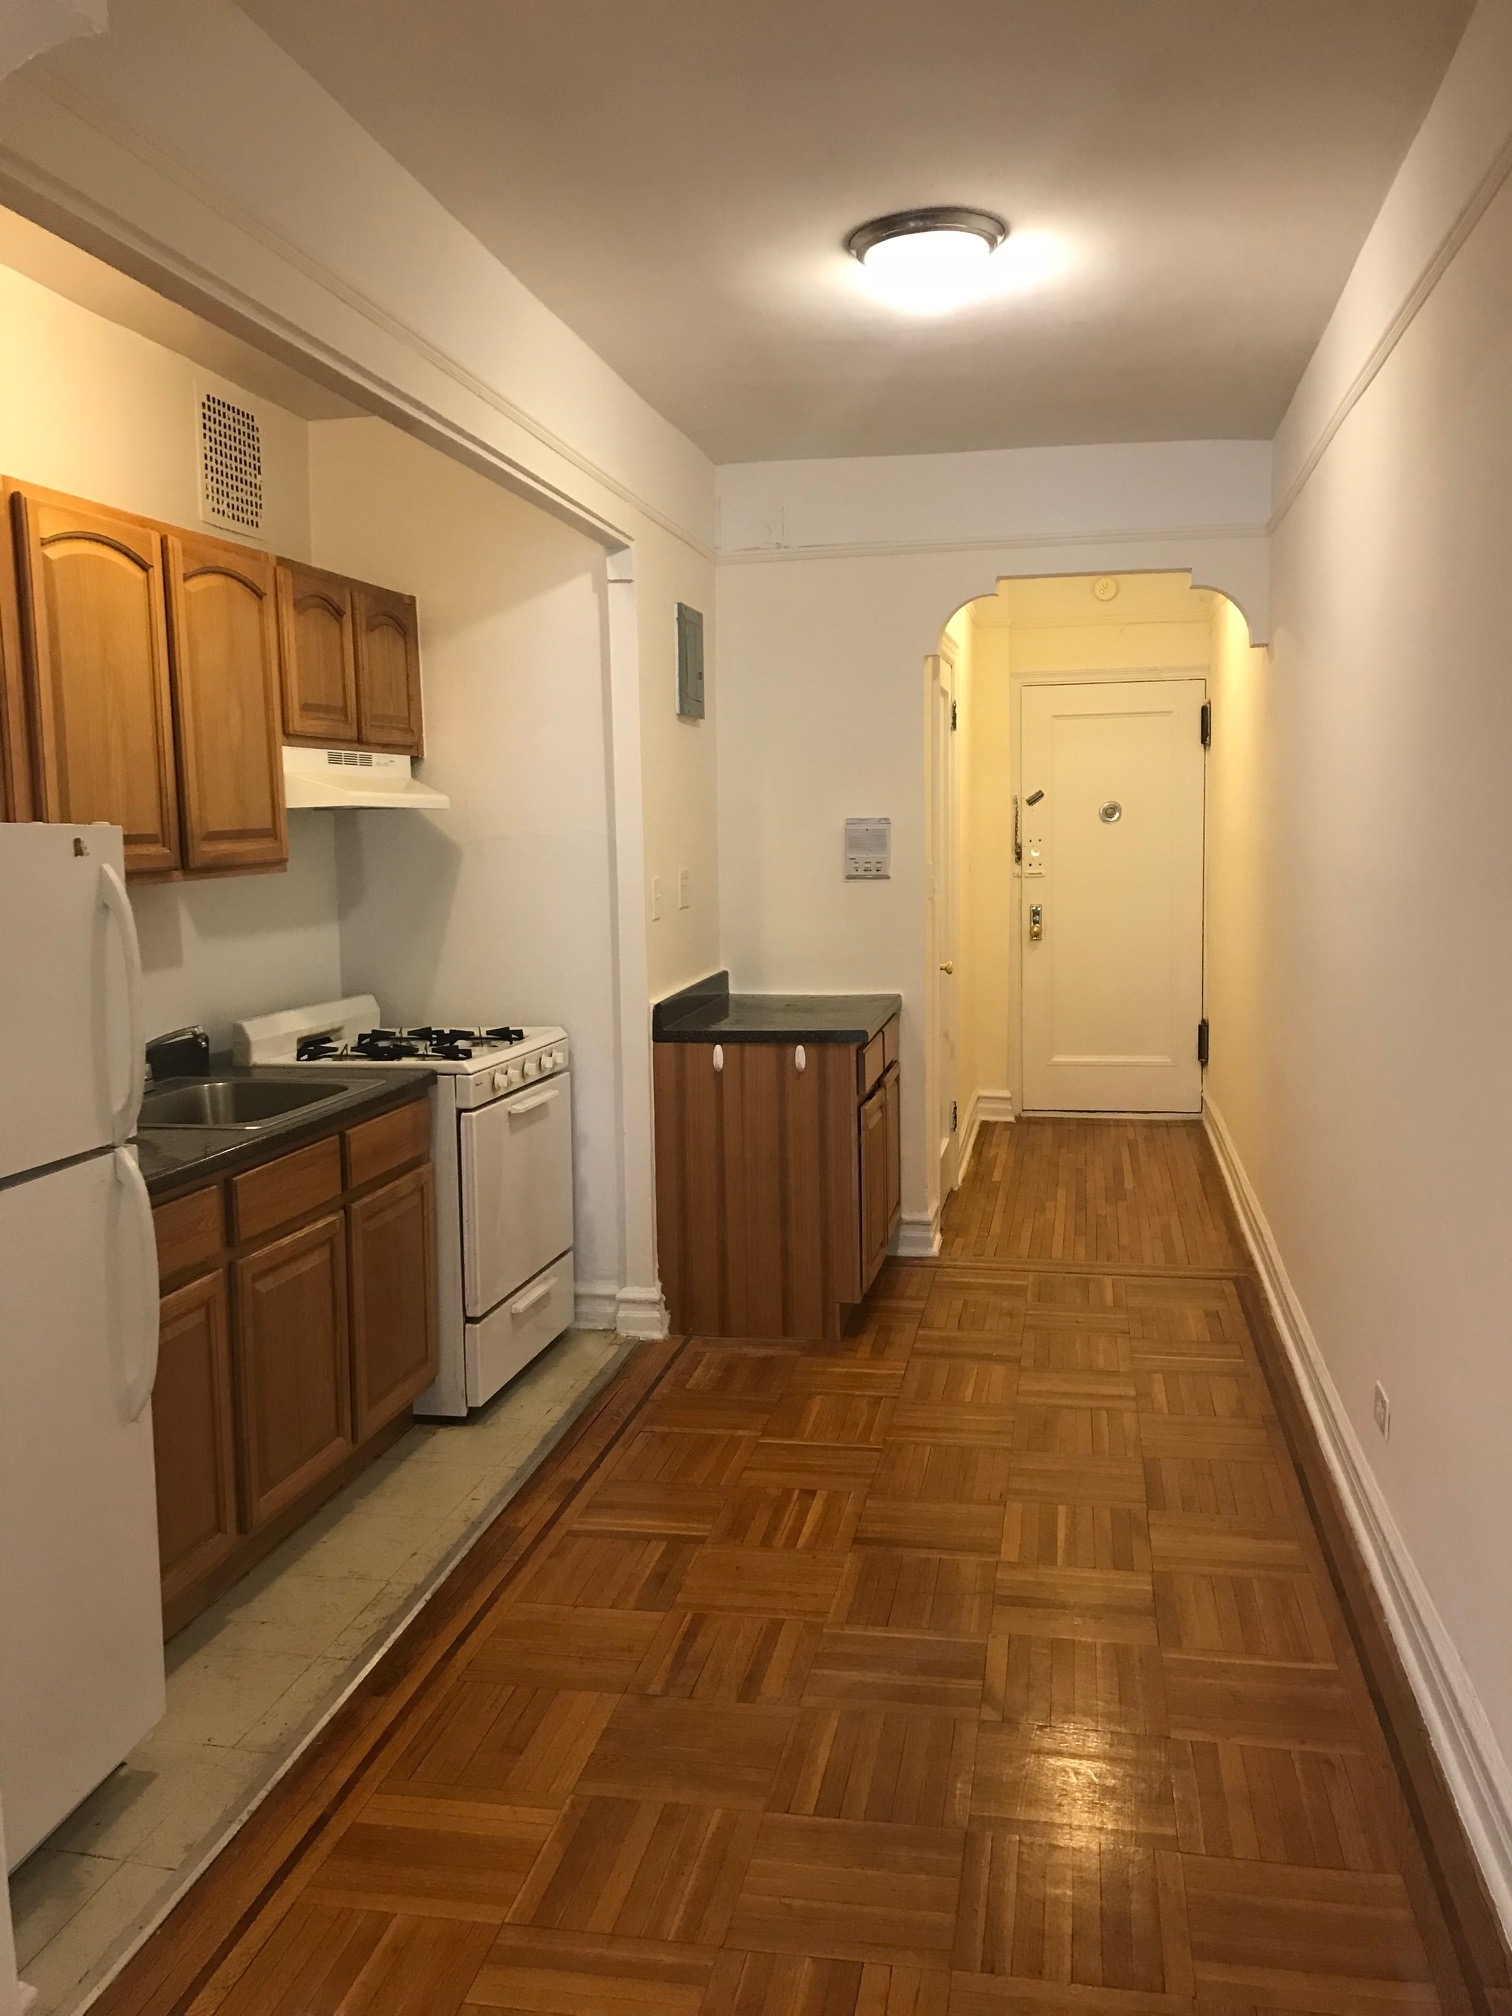 Apartment 108th Street  Queens, NY 11375, MLS-RD2026-5